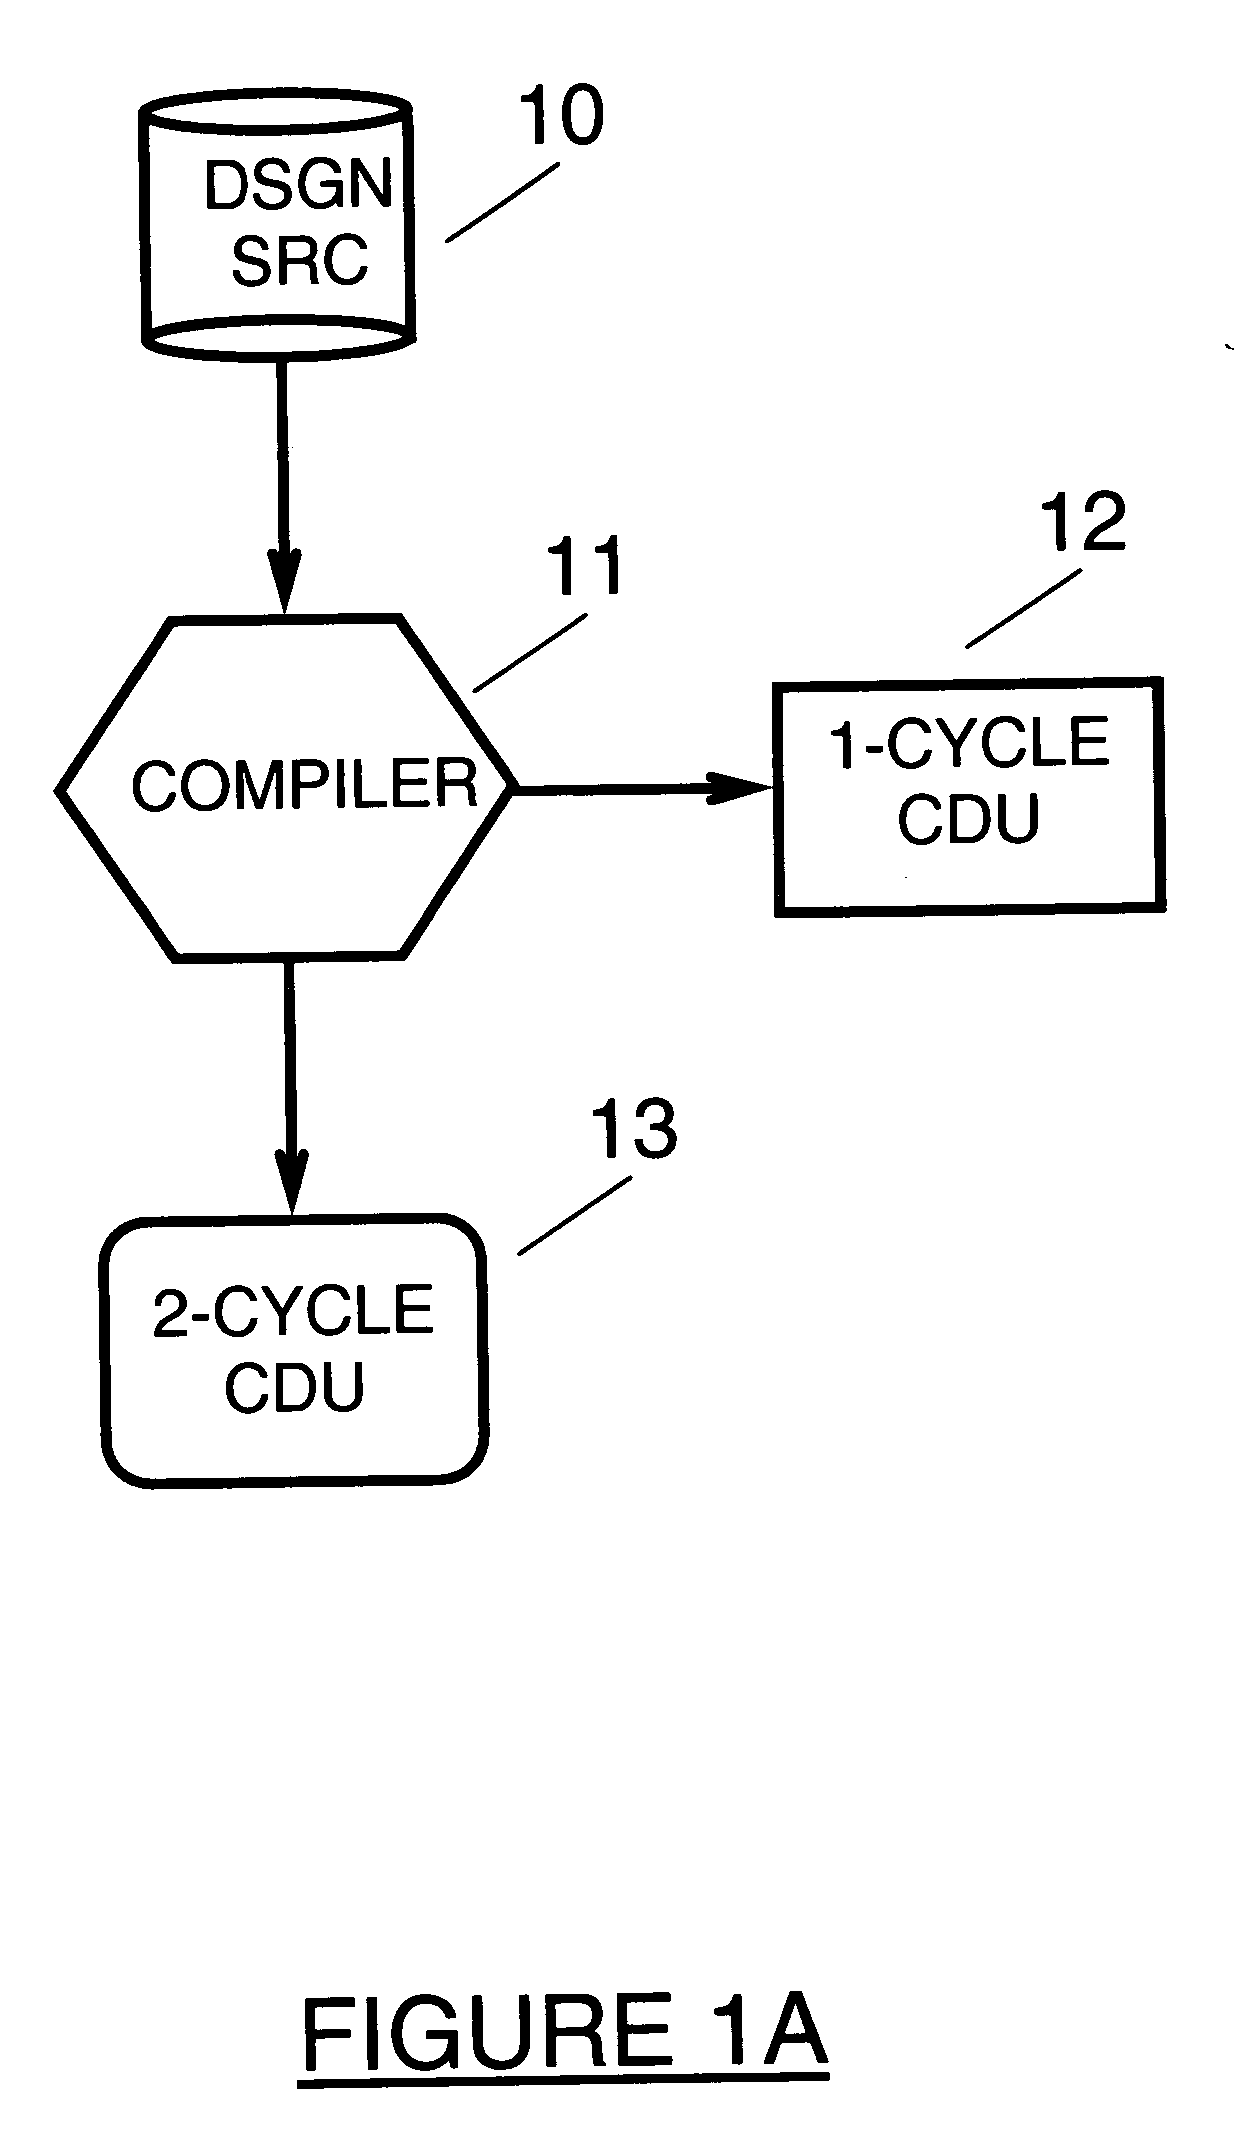 Method for the creation of a hybrid cycle simulation model